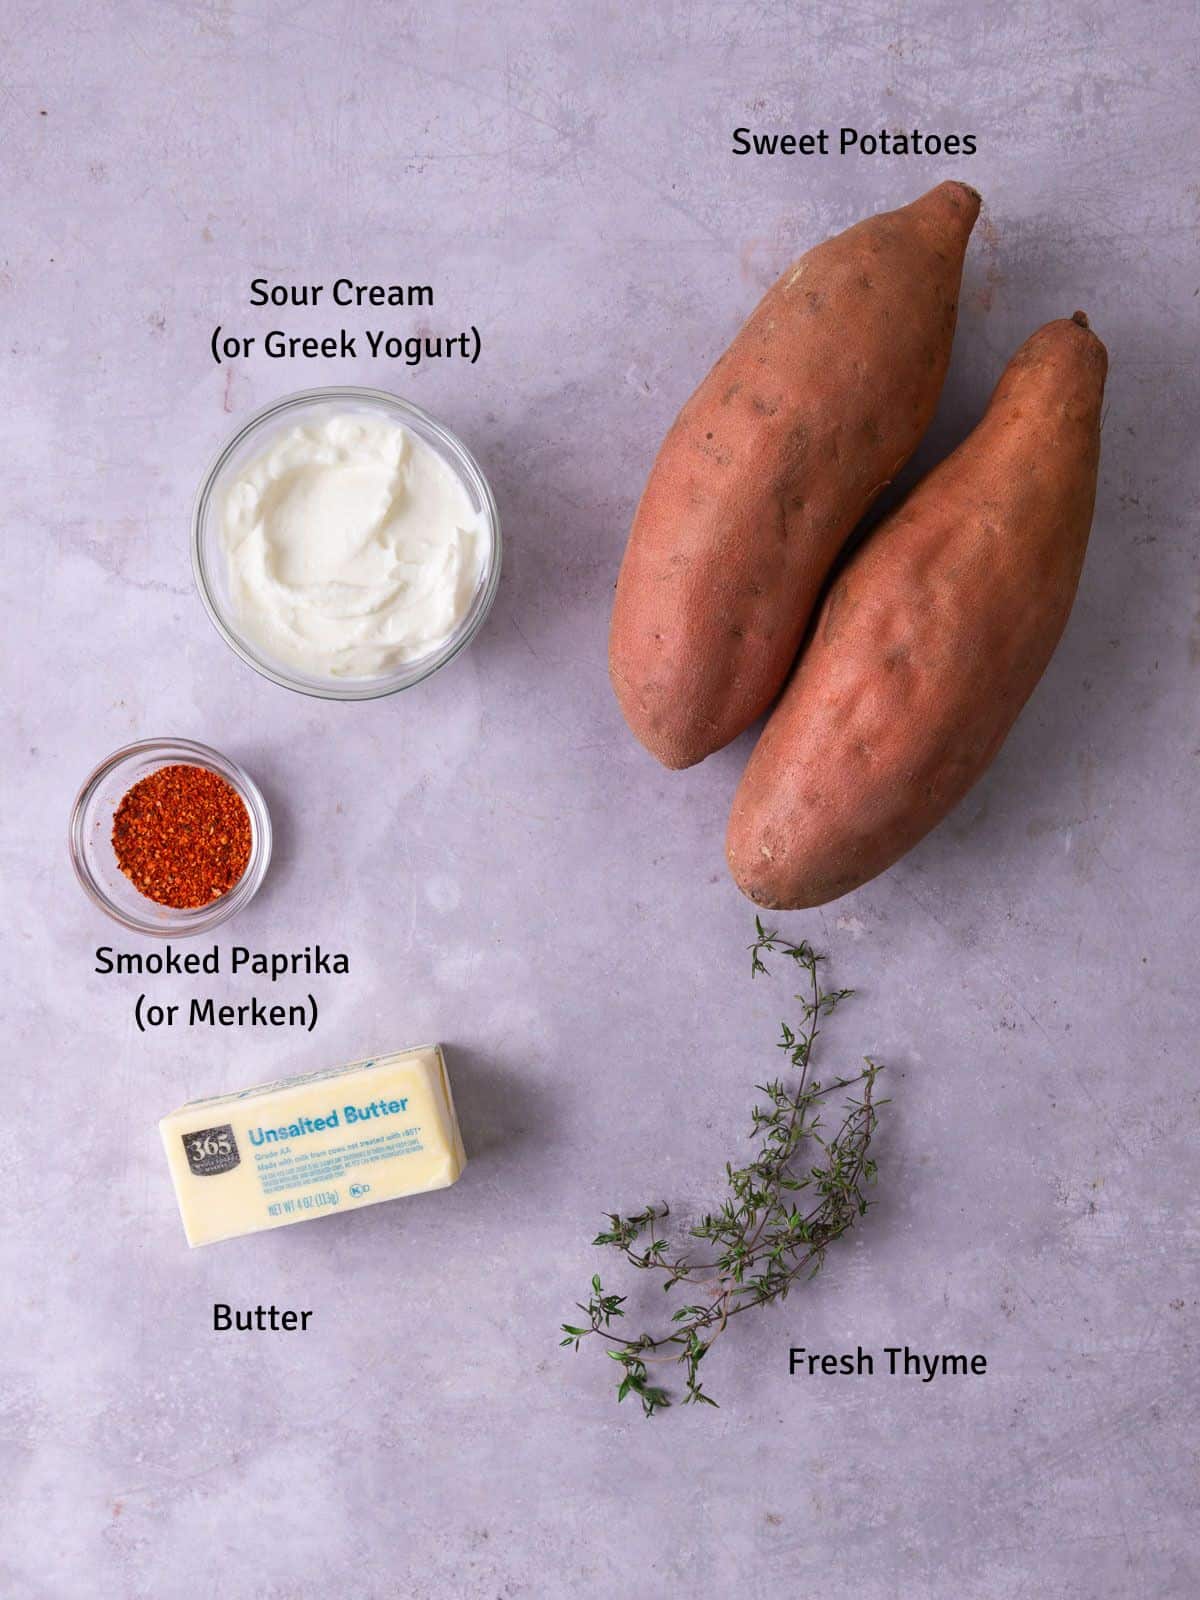 Ingredients for savory mashed sweet potatoes, including smoked paprika, yogurt, butter and thyme.